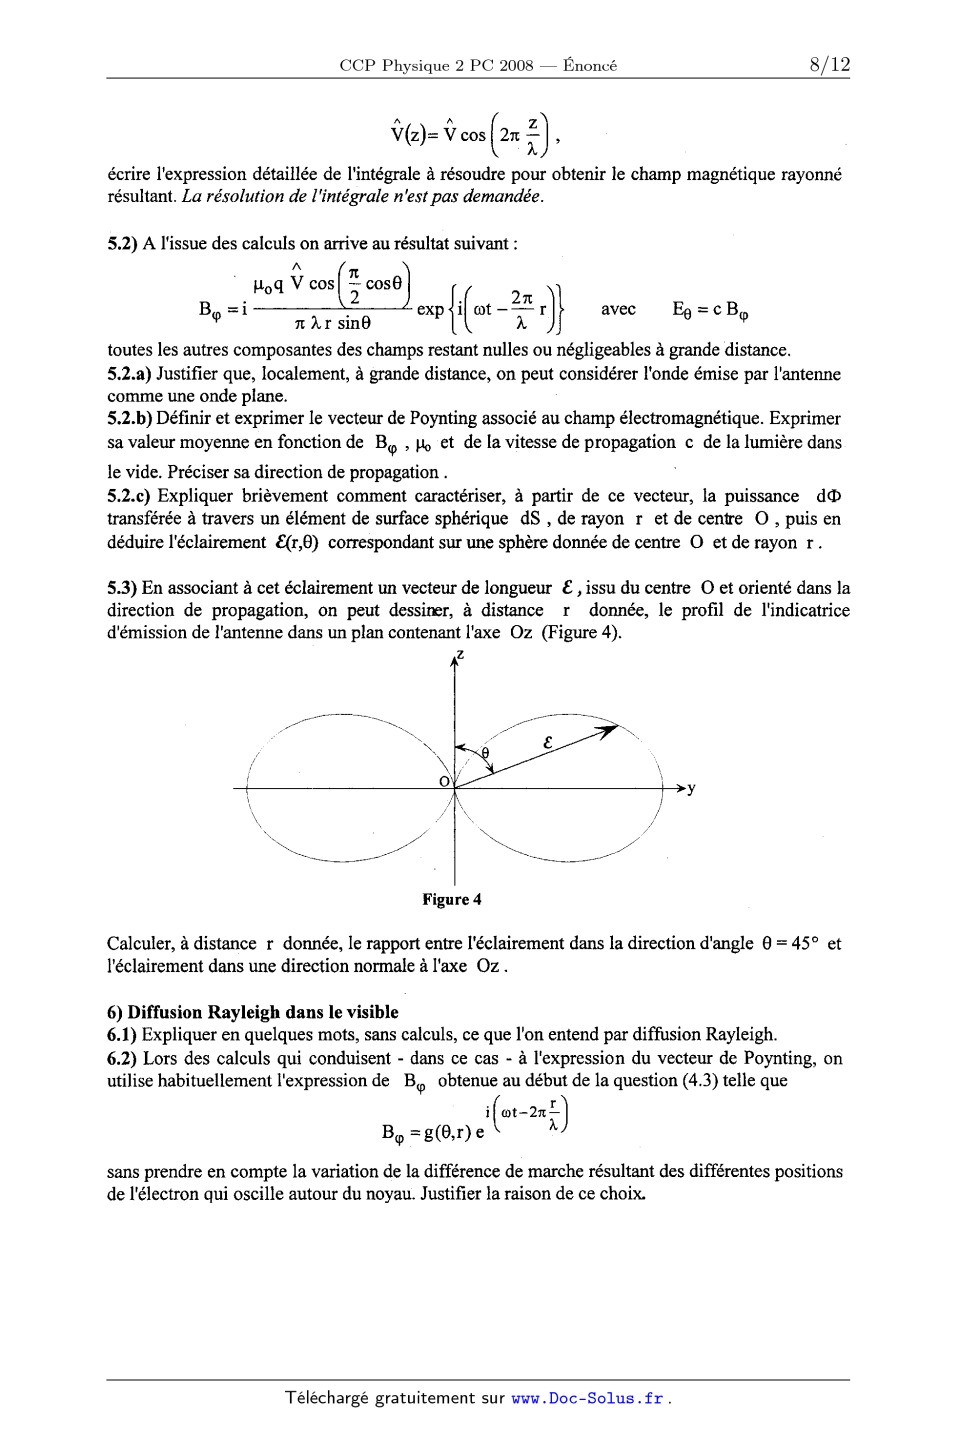 Poynting Vector Field In The X Z Plane Through The Dipole The